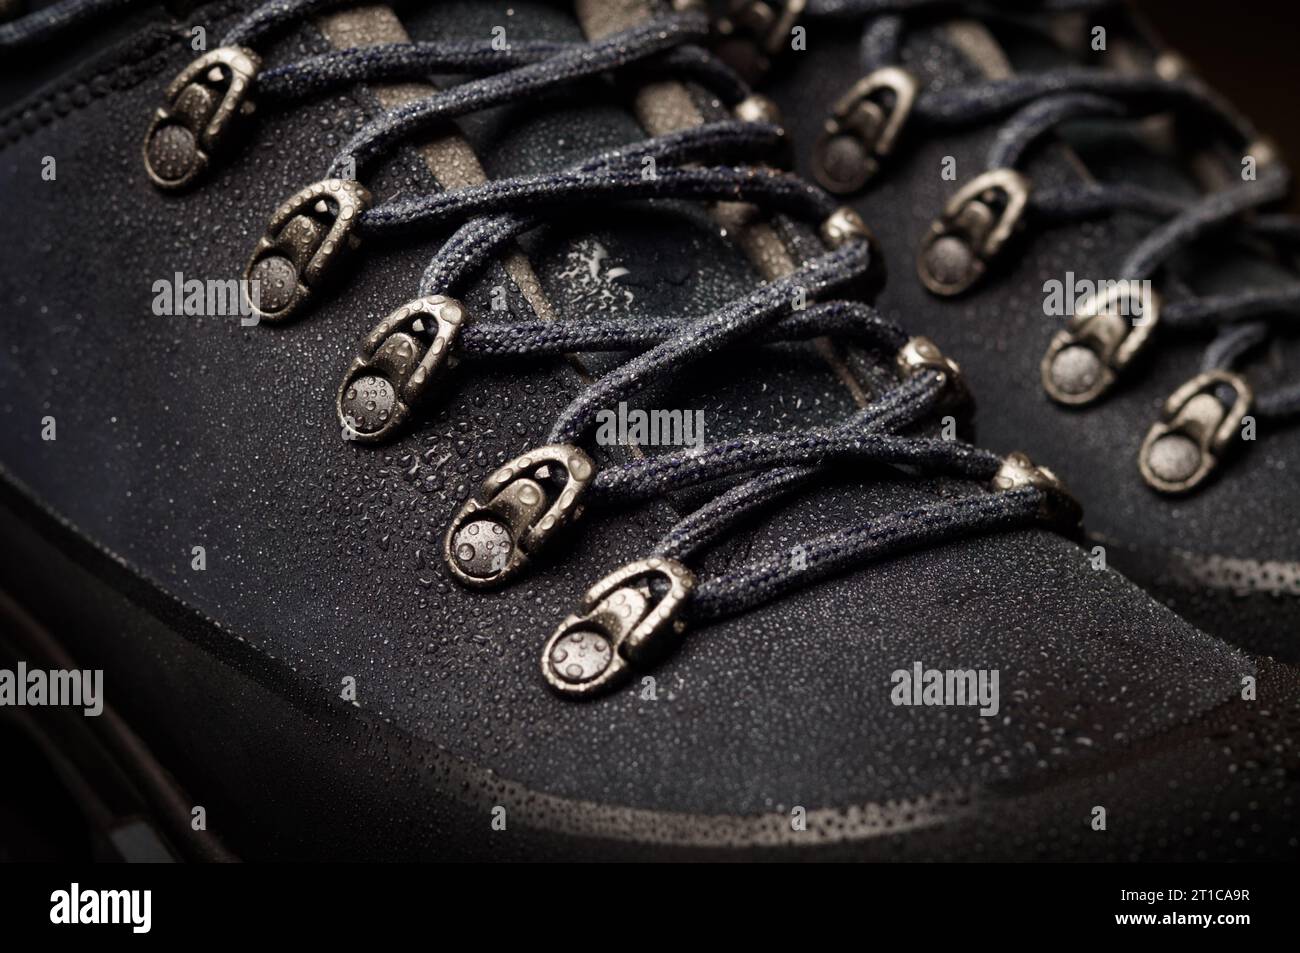 Tourist boots for mountain hikes with reinforced soles and membrane material. raindrops on the surface Stock Photo